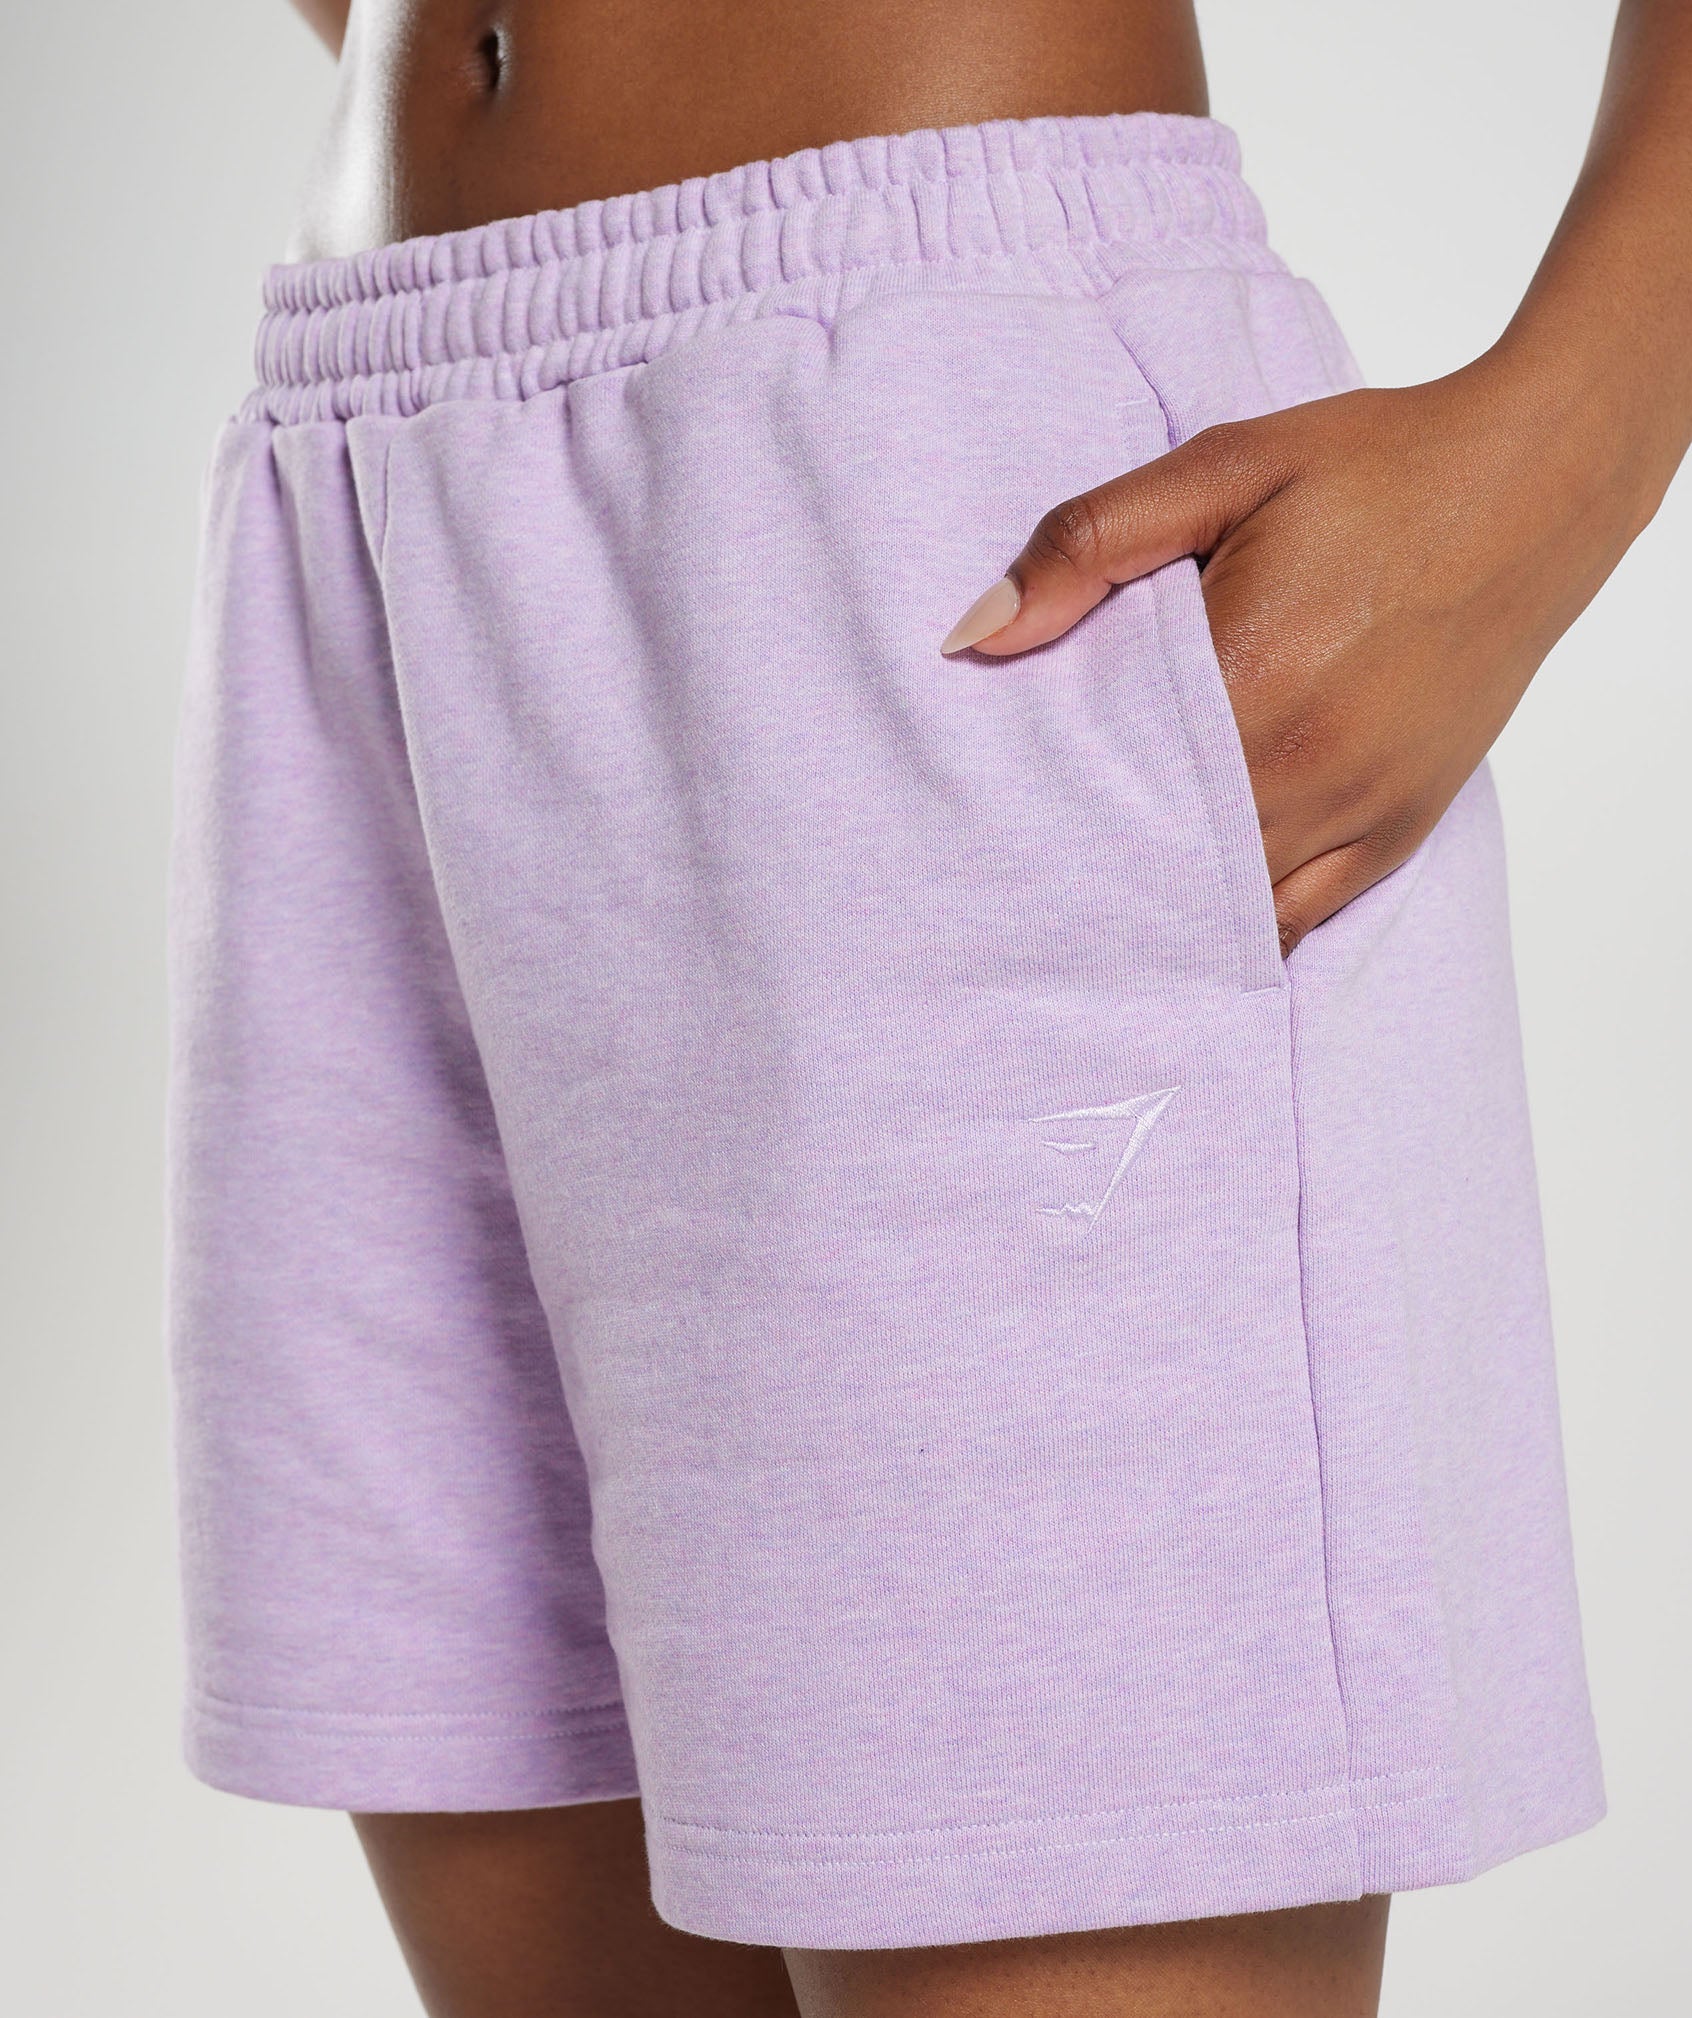 Rest Day Sweats Shorts in Aura Lilac Marl - view 5